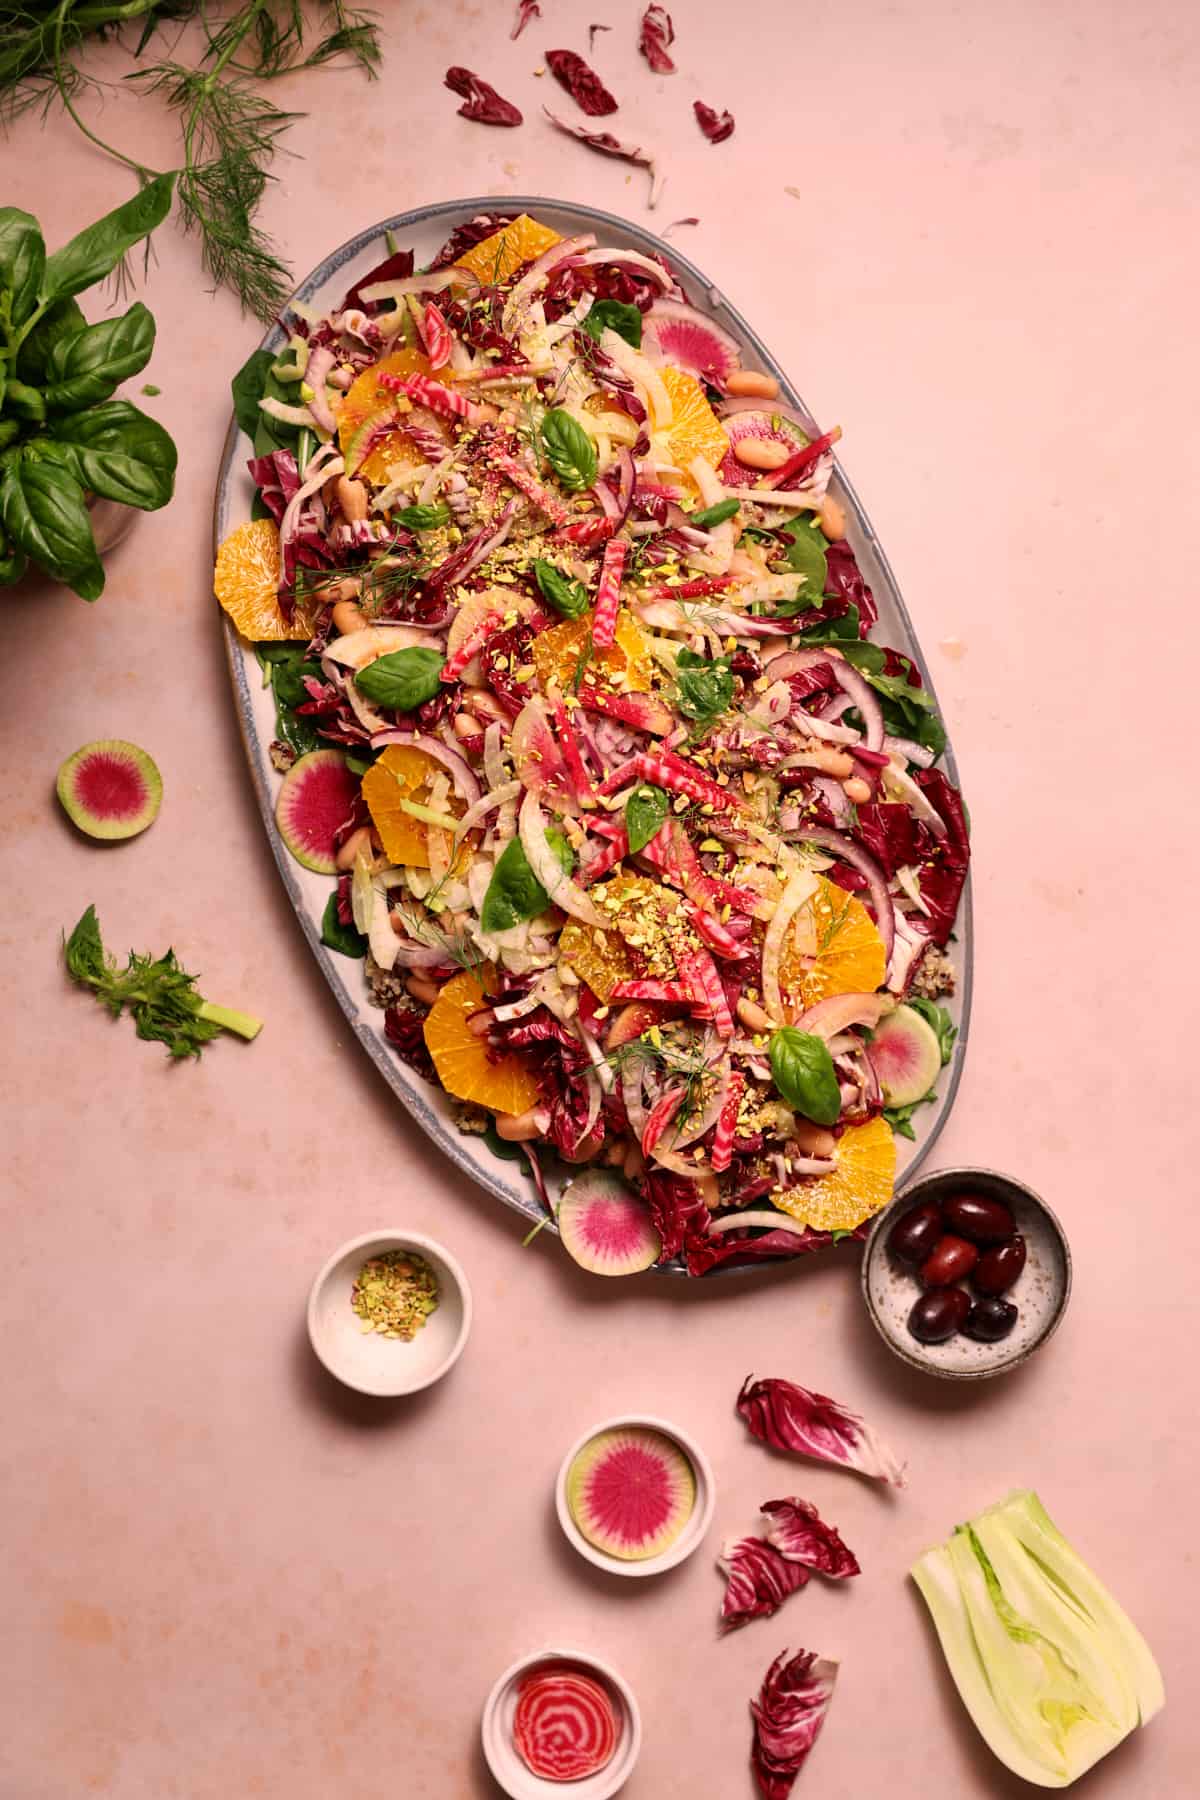 An oval platter filled with a colorful vegan winter salad with oranges and radicchio.